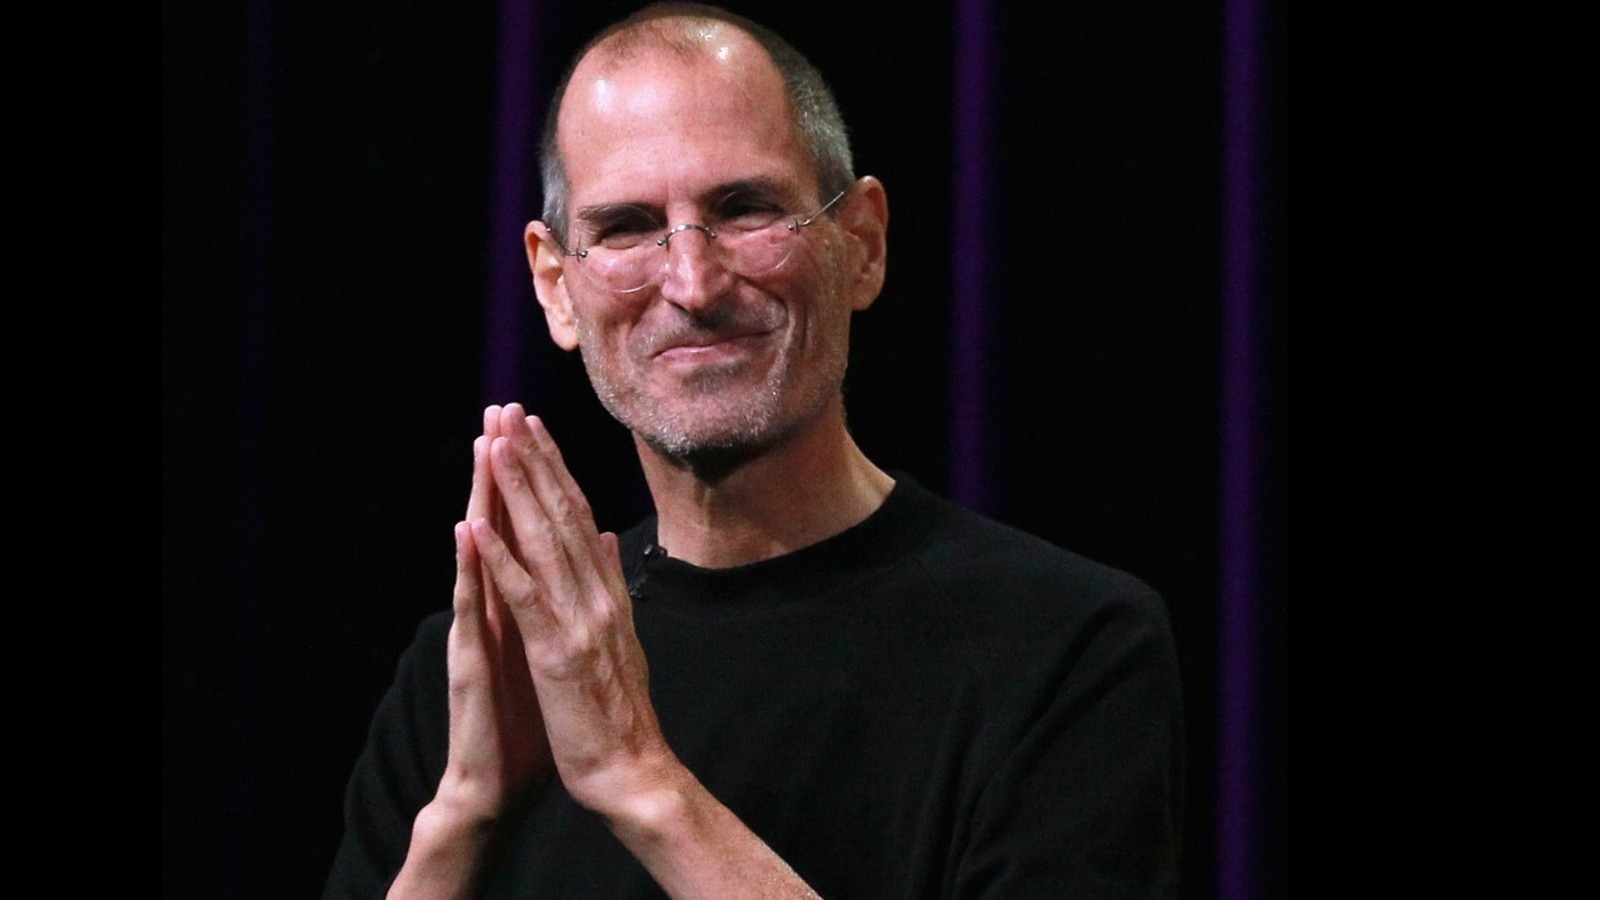 Here’s What We Found Out About Steve Jobs’ Health after His Death